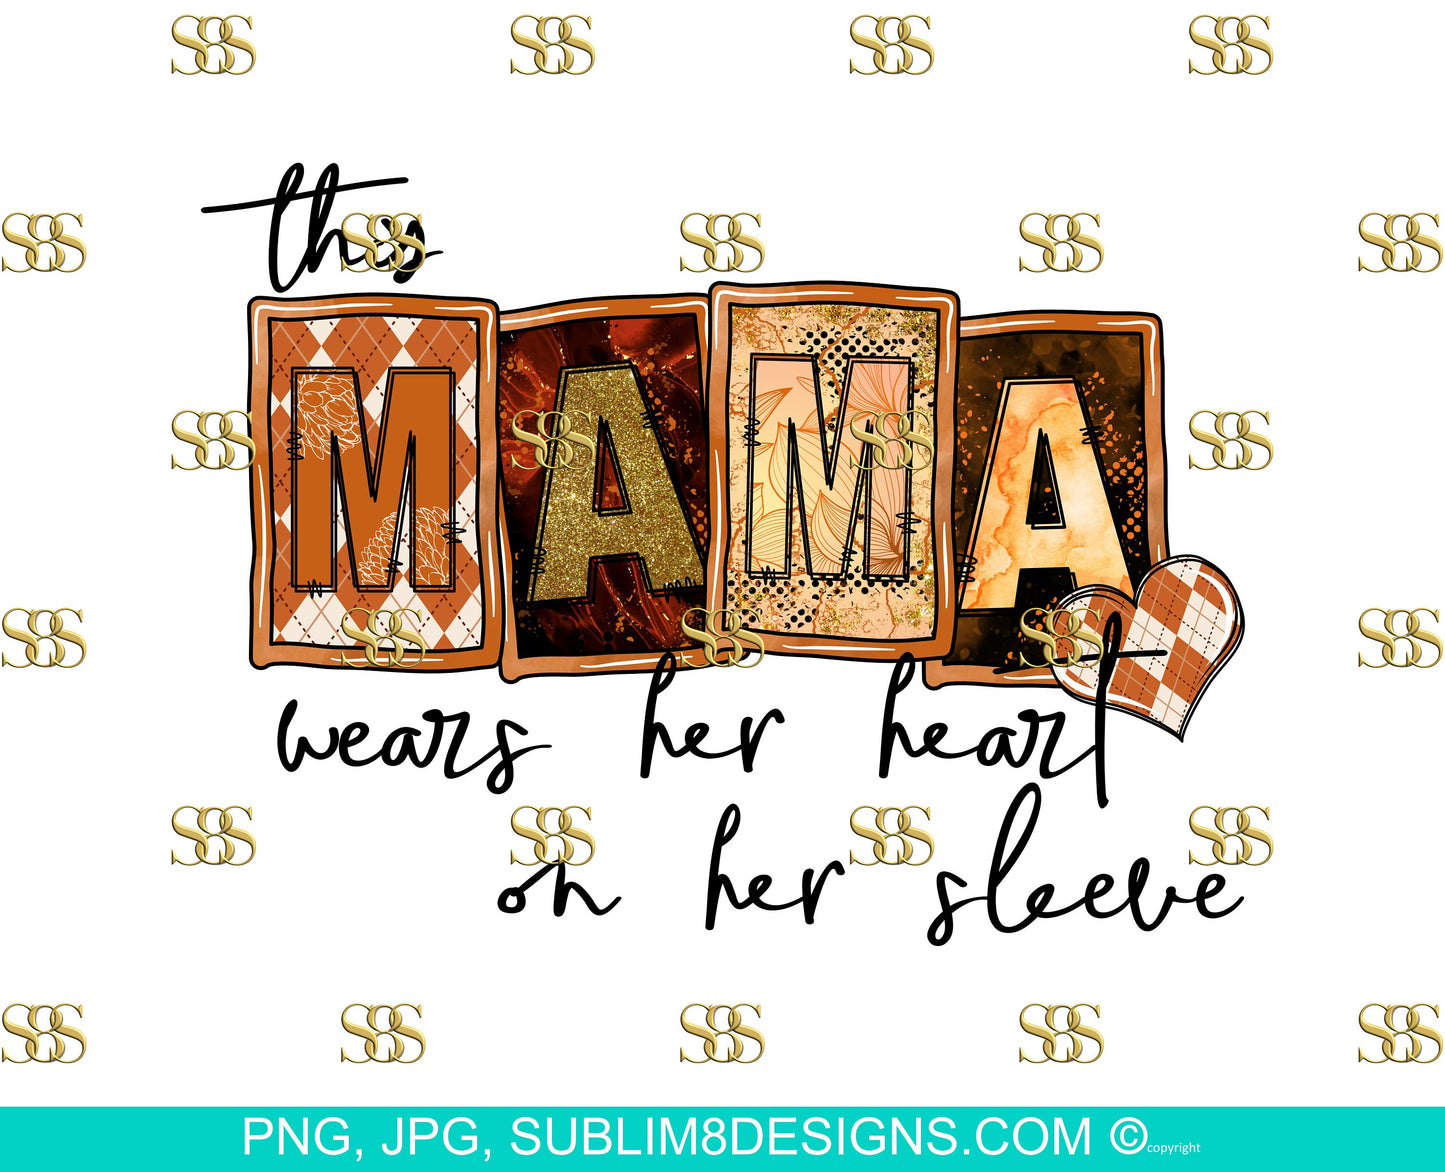 This Mama Wears Her Heart On Her Sleeve Doodle Font Sublimation Design PNG and JPG ONLY